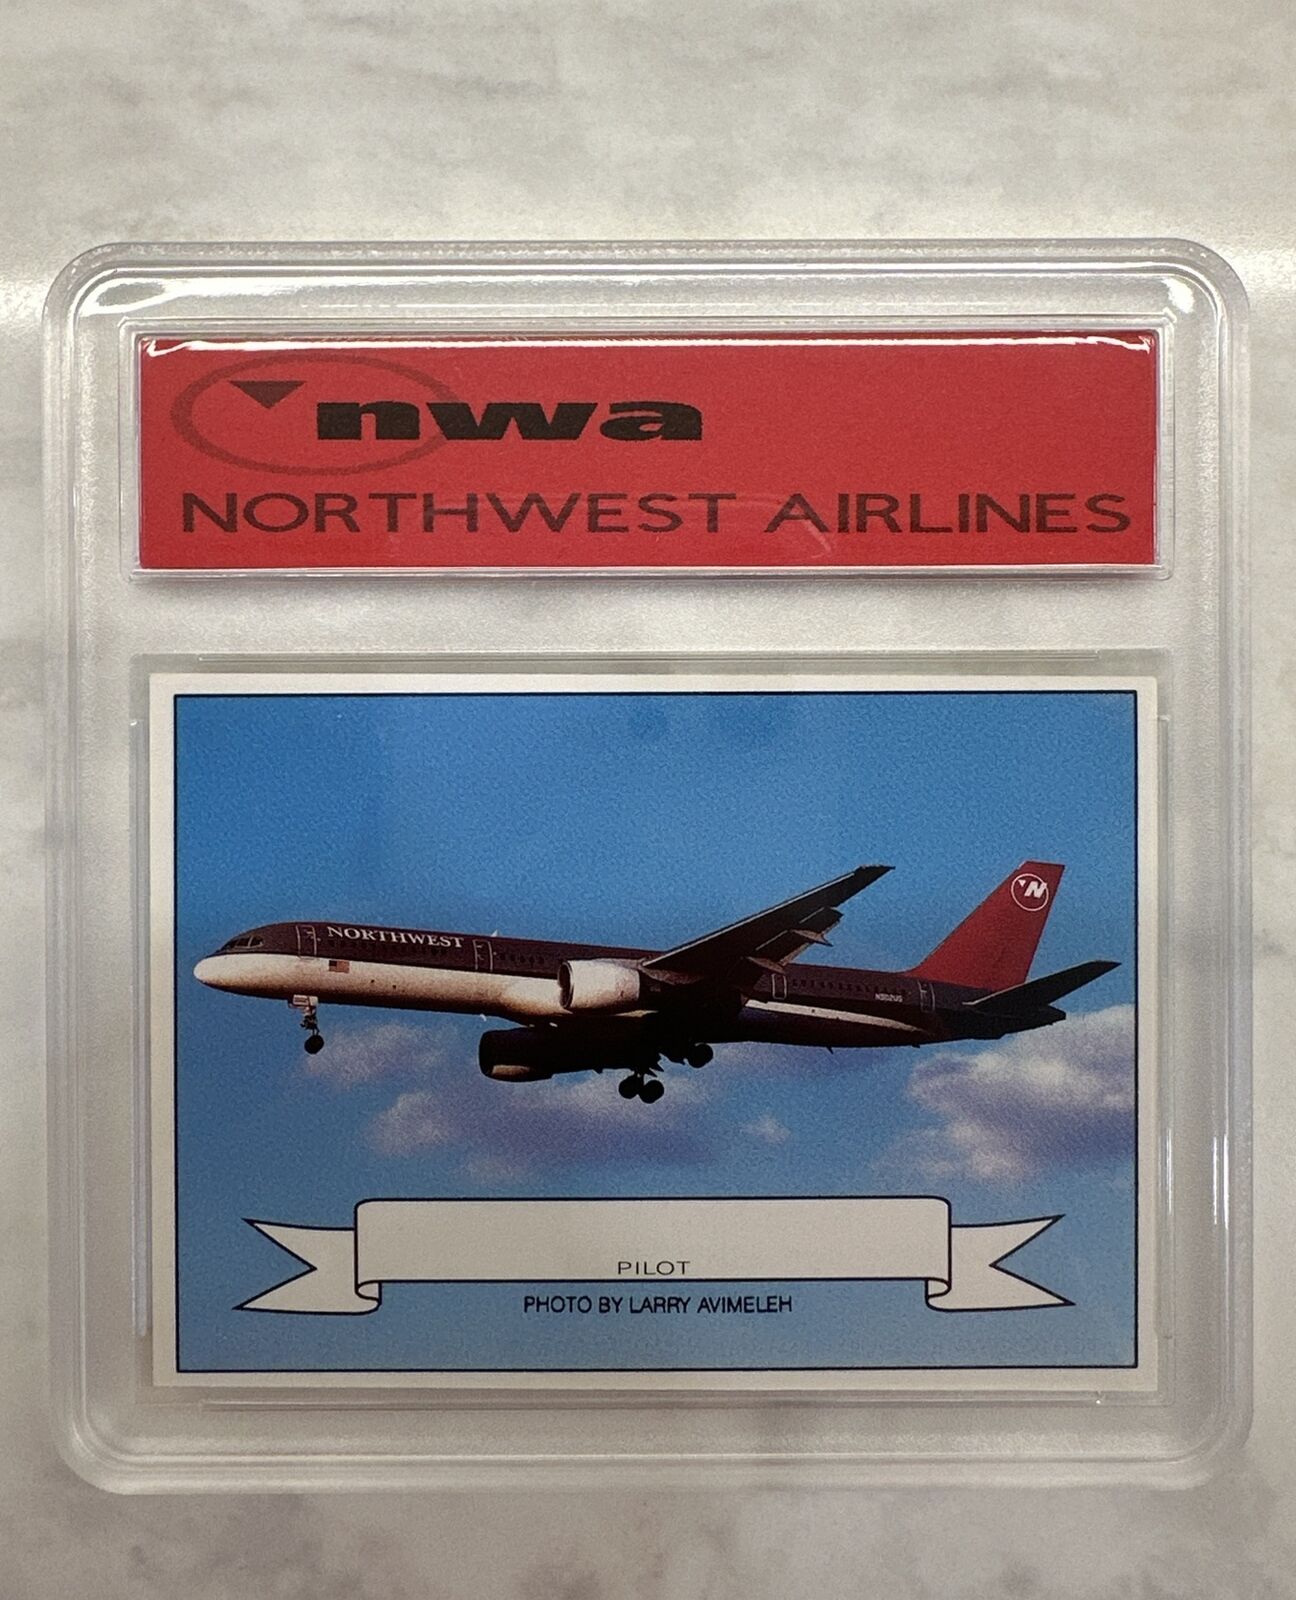 NORTHWEST AIRLINES PILOT TRADING CARD 1990s BOEING 757 RARE HARD CASE MINT